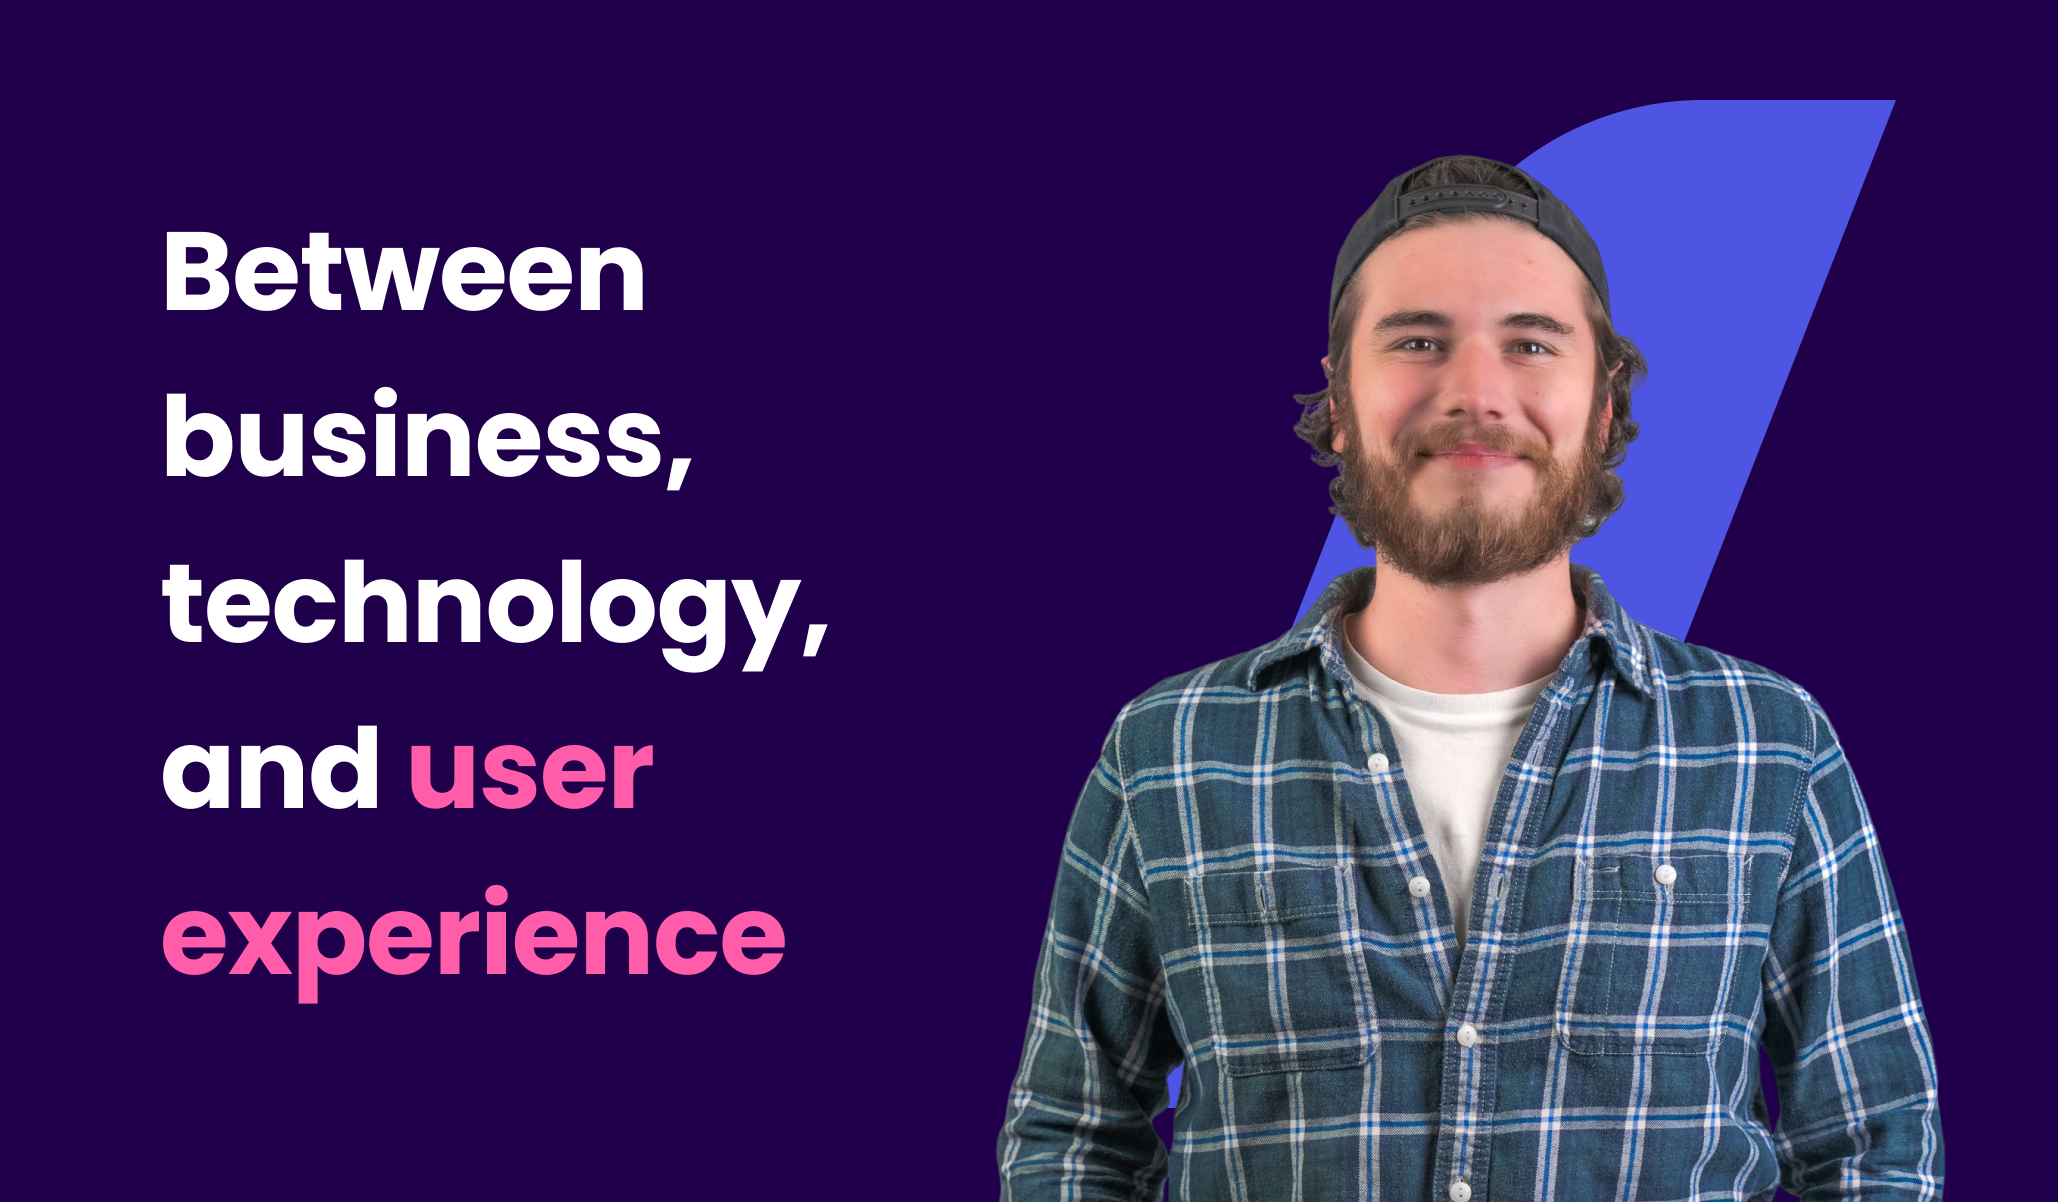 Balancing business, technology, and user experience